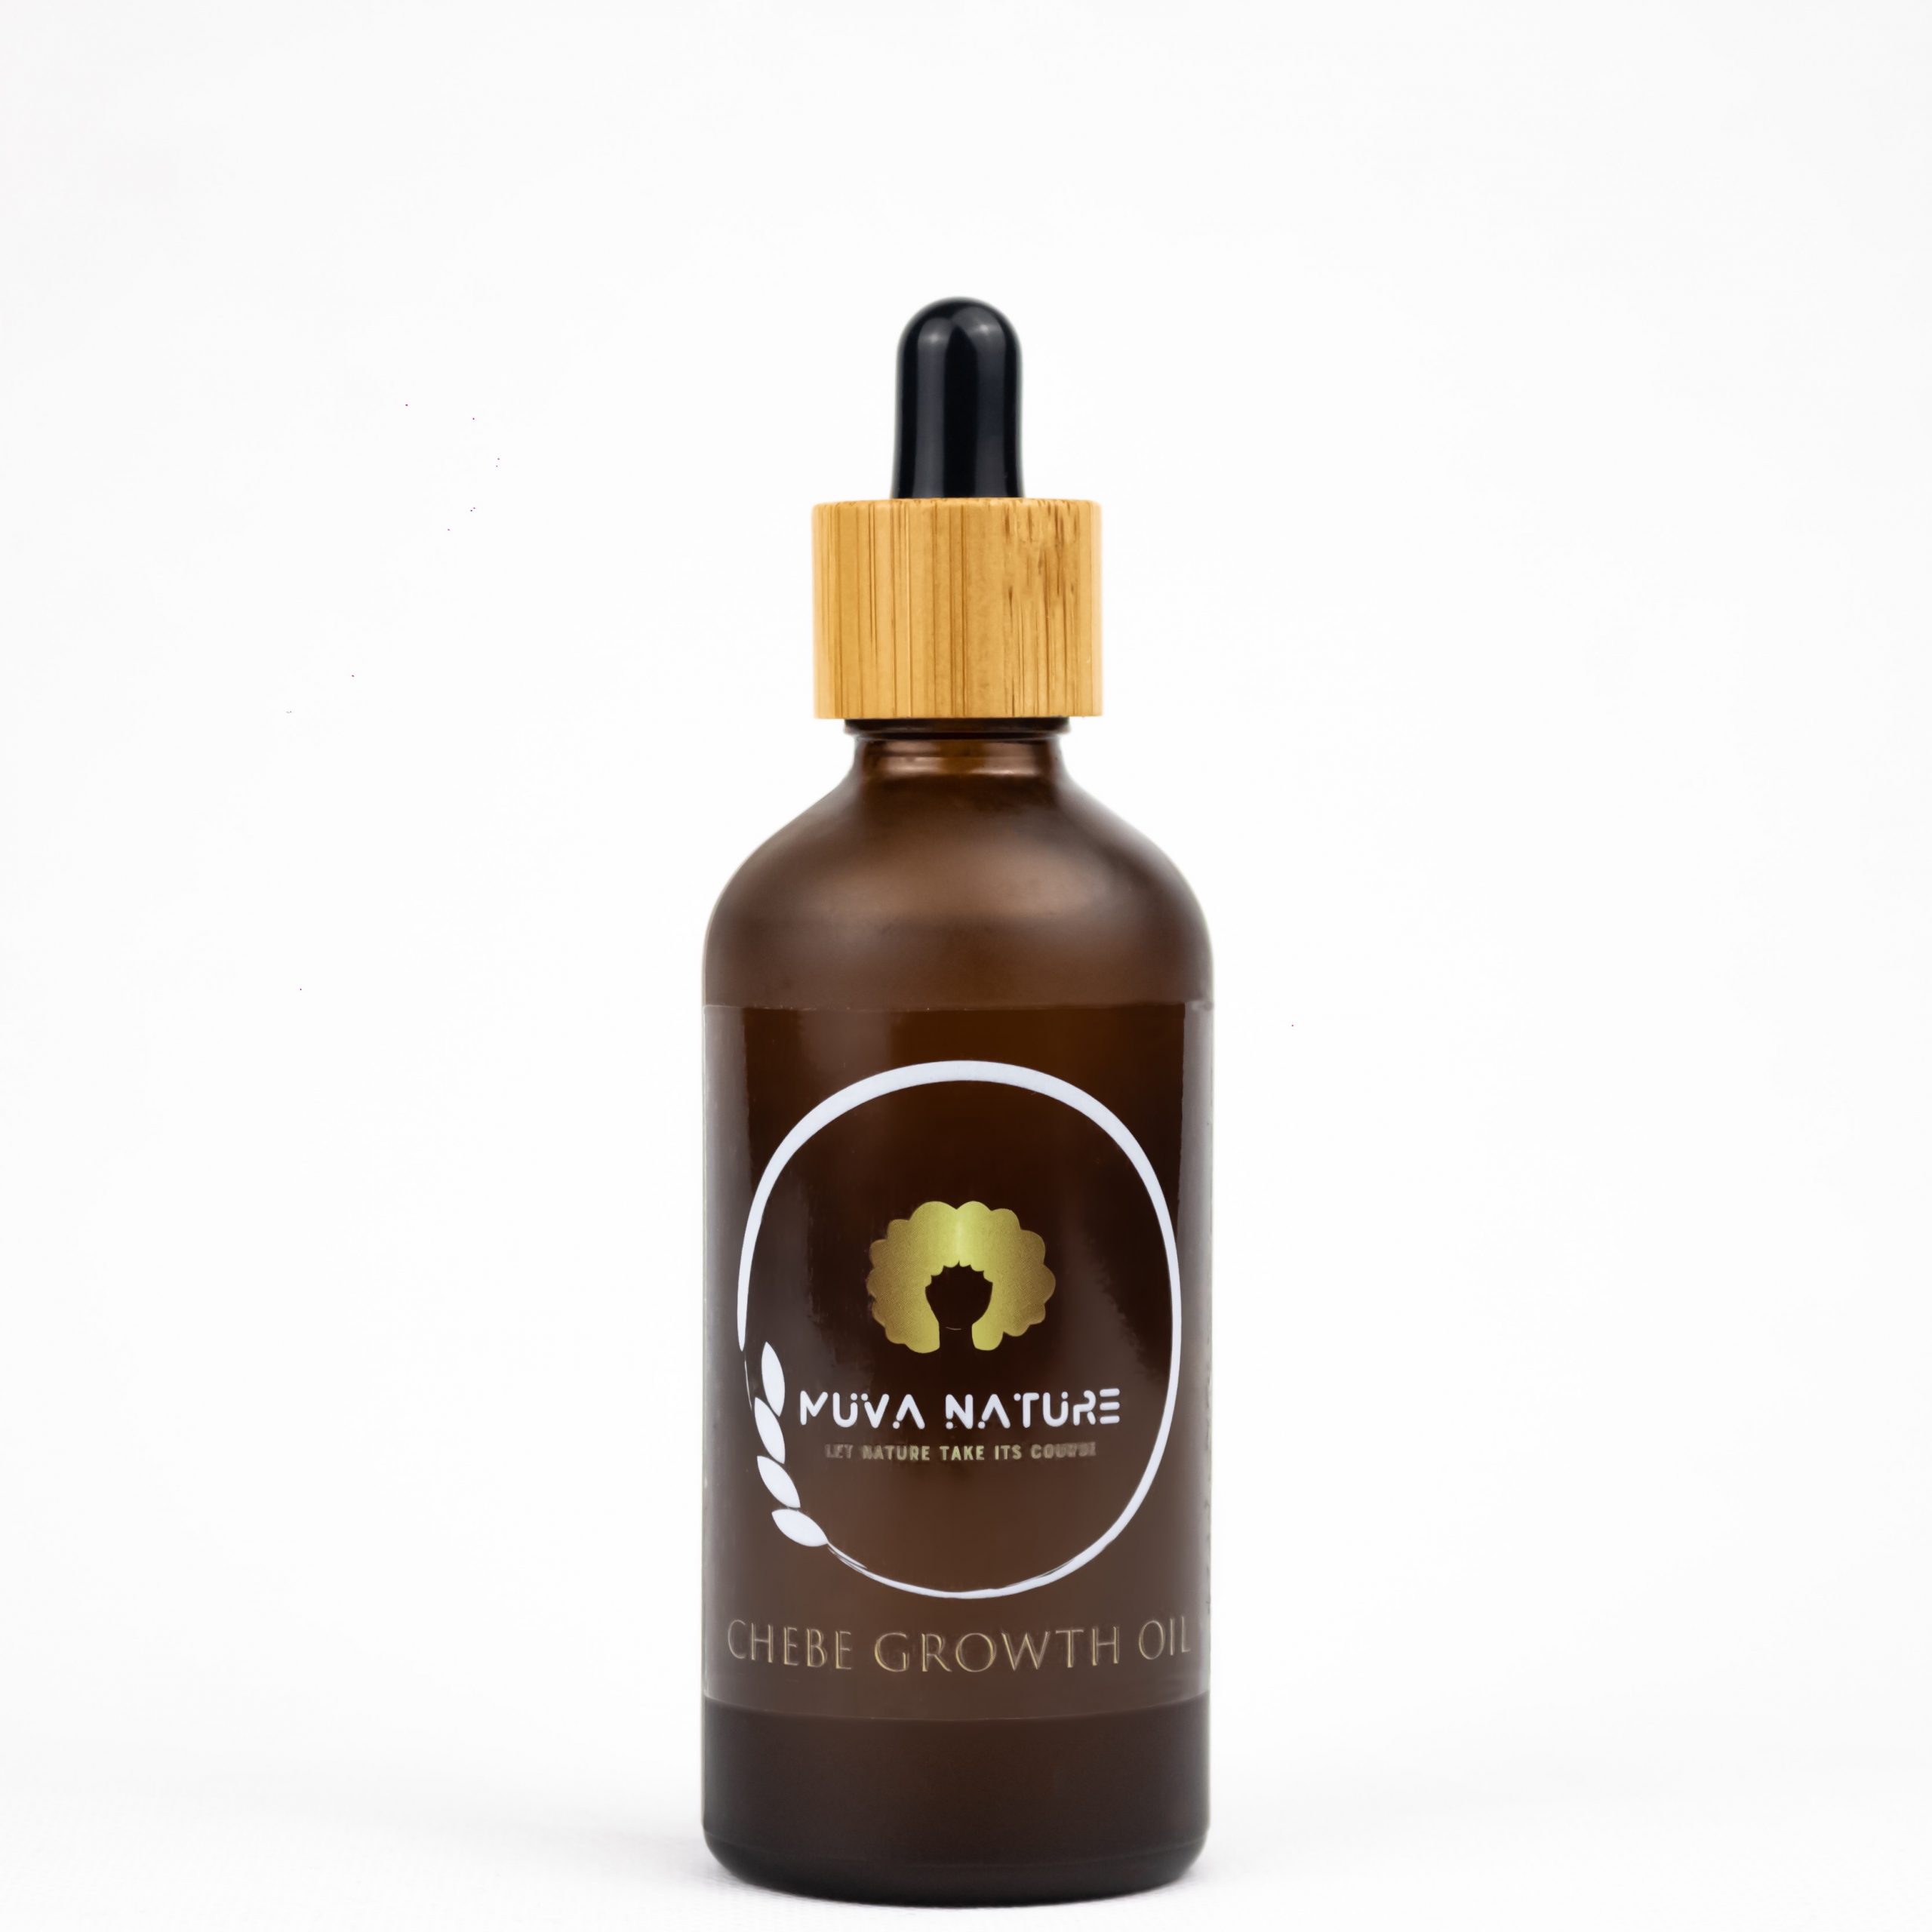 Chebe Growth Oil - Rosemary & Lavender - Muva Nature